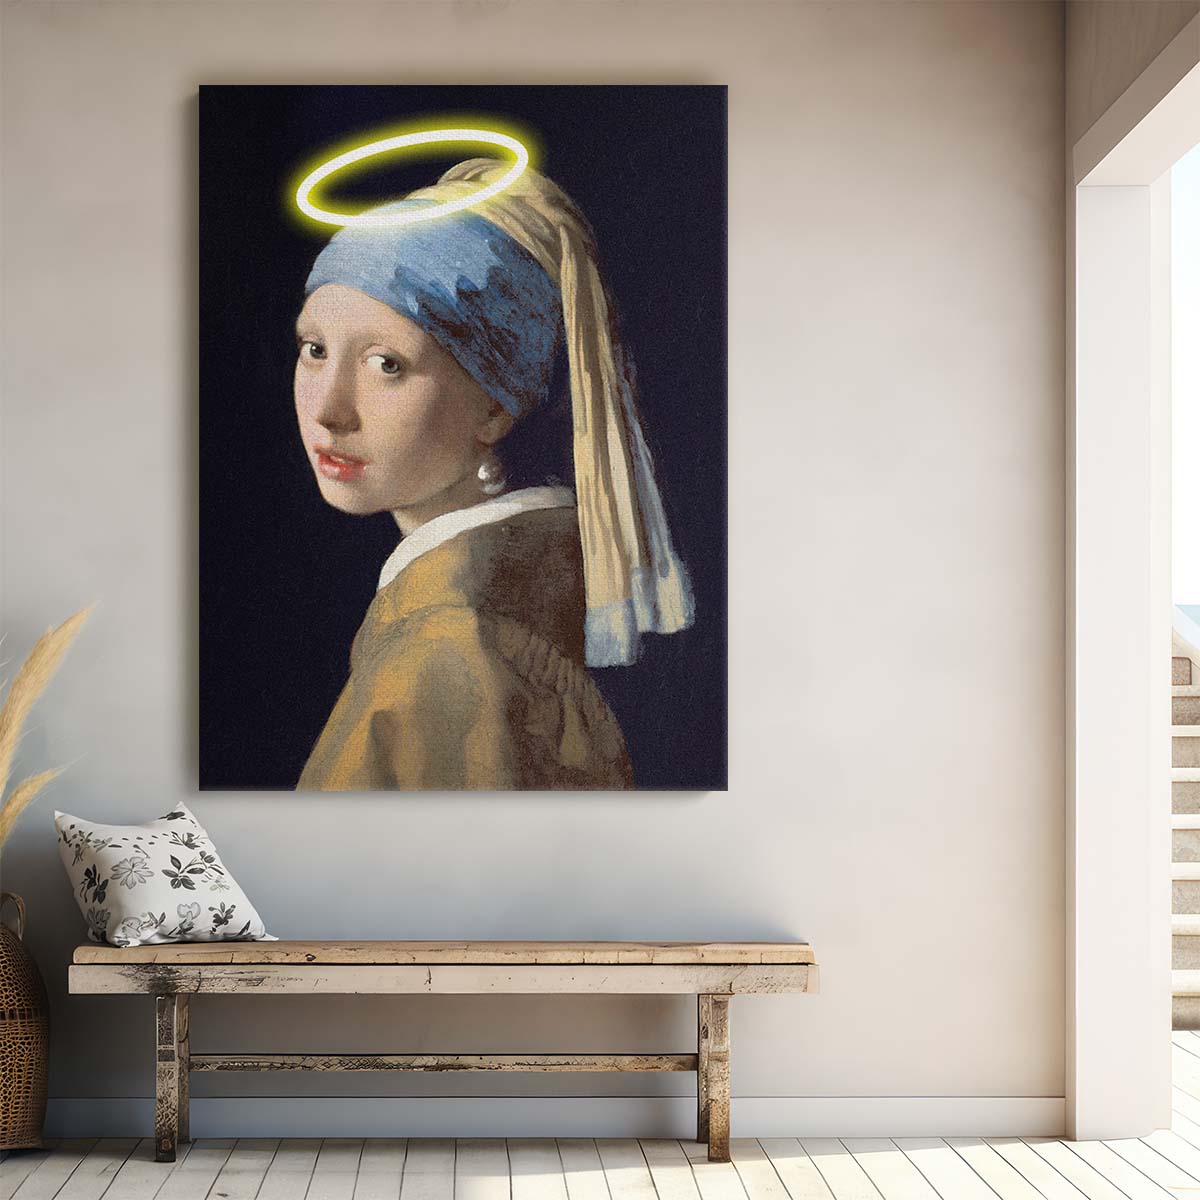 Illustrated Vermeer's Girl with Pearl Earring & Halo Digital Art by Luxuriance Designs, made in USA